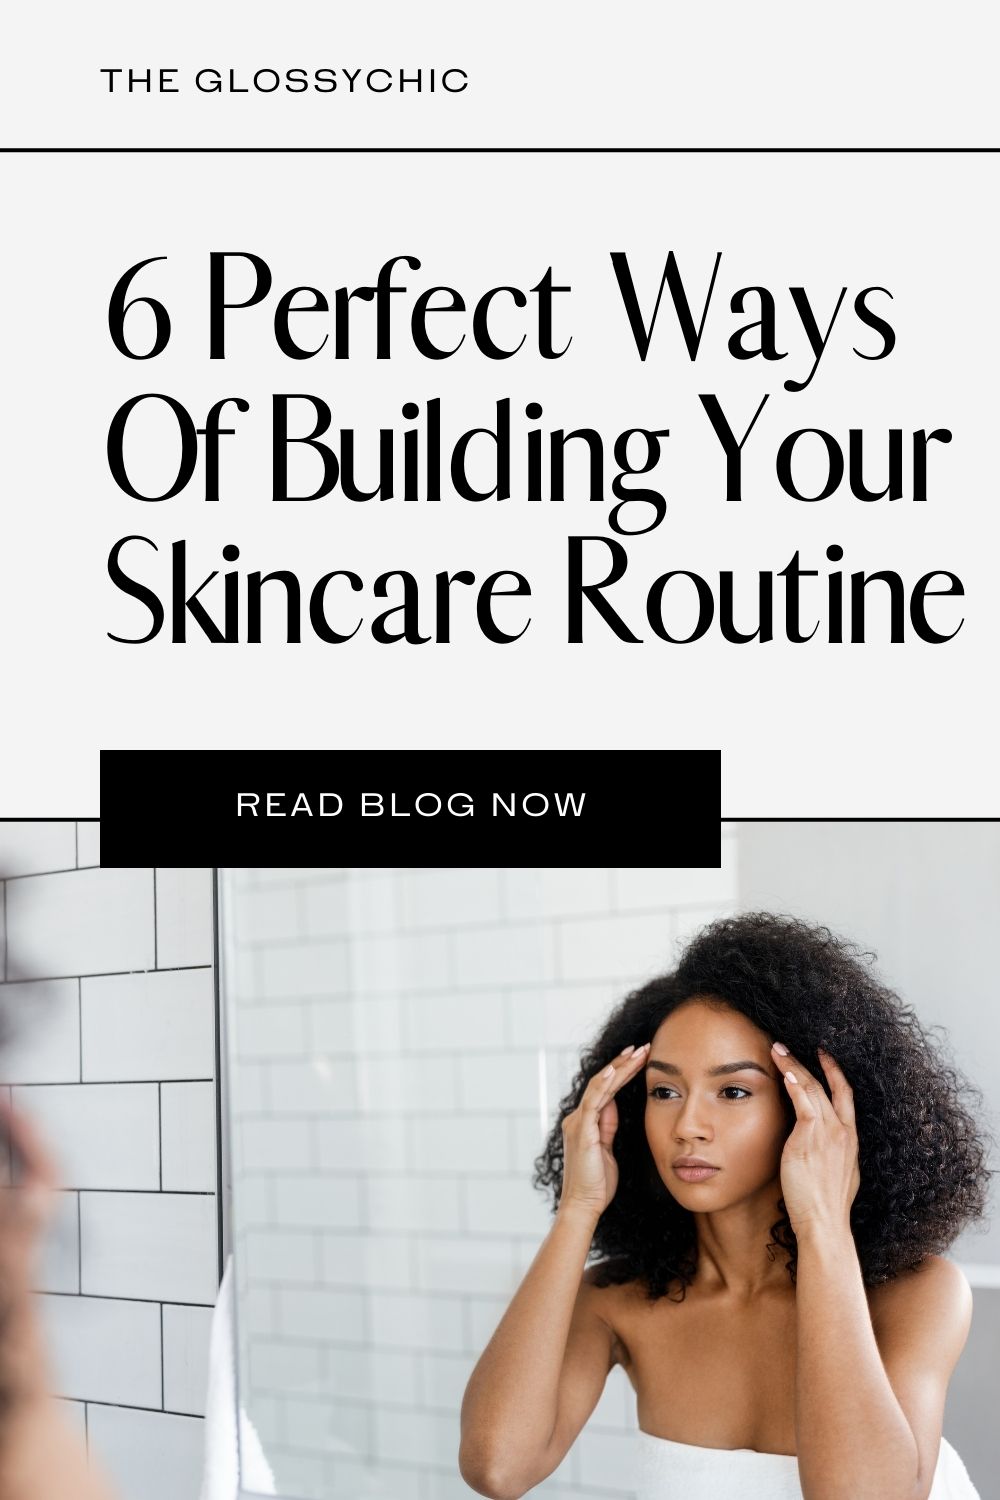 6 Perfect Ways Of Building Your Skincare Routine